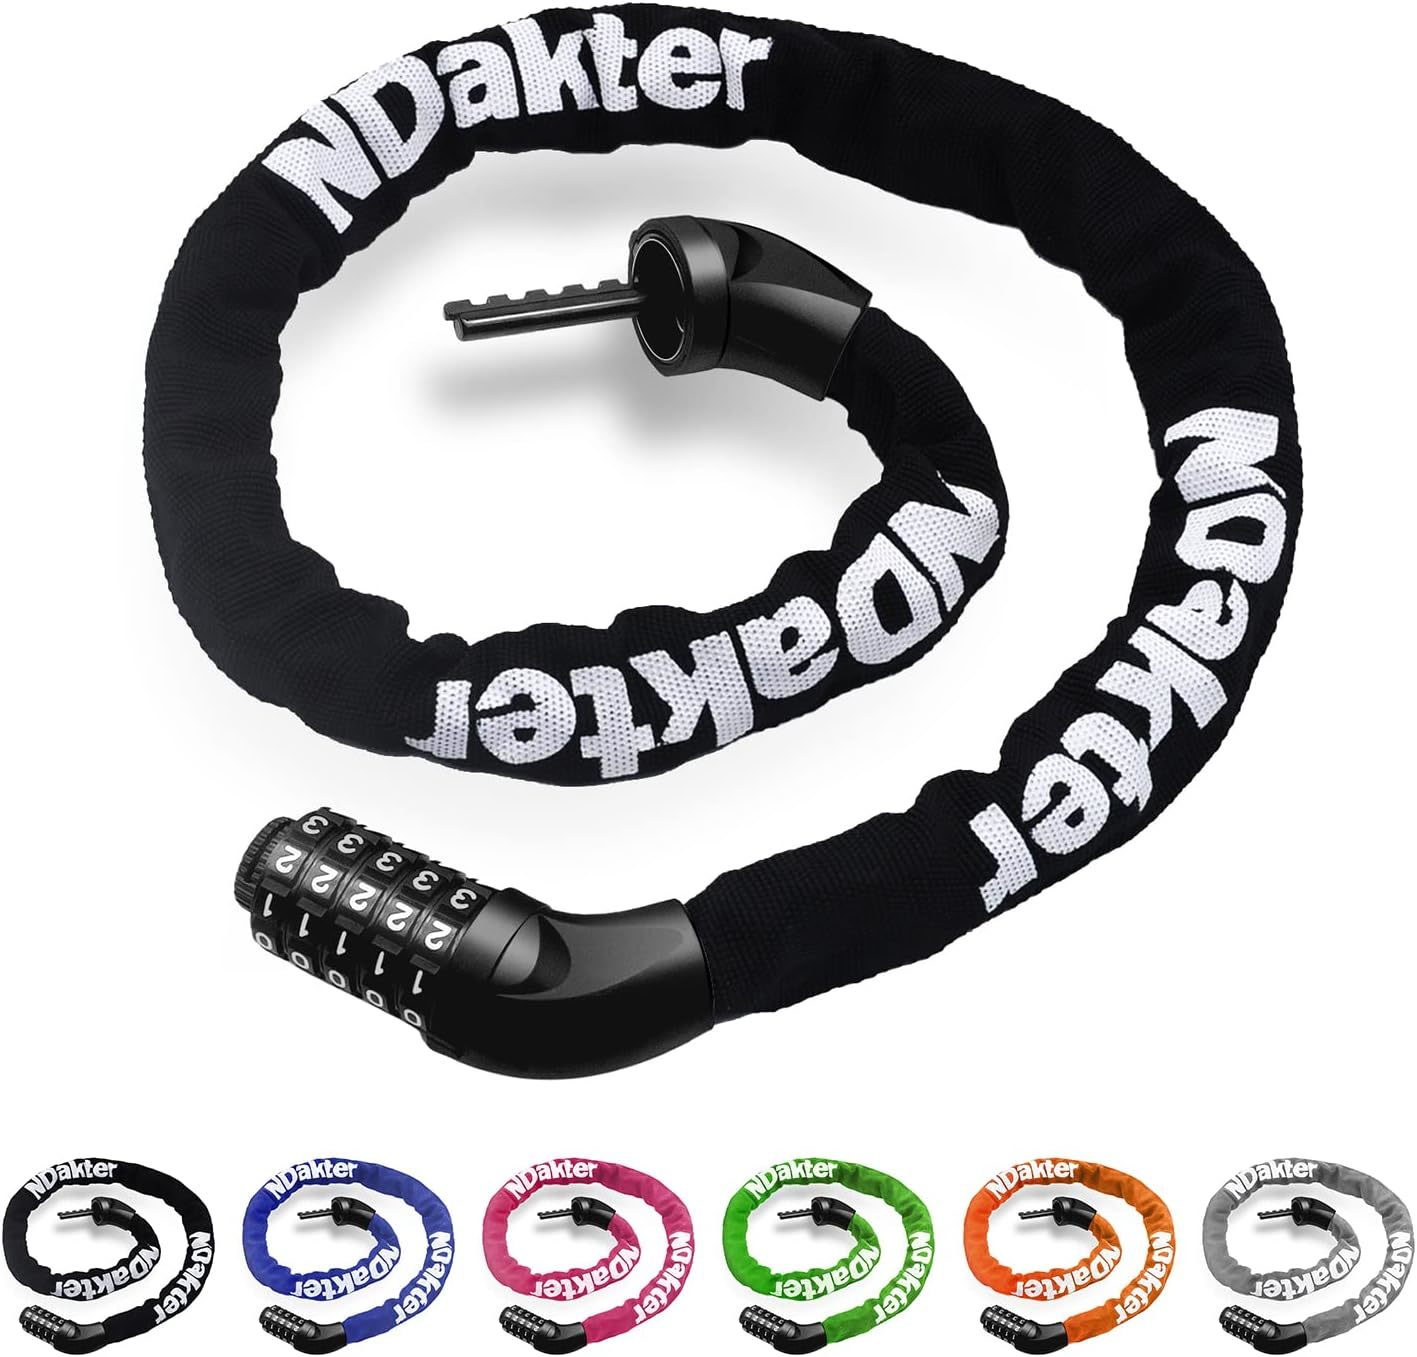 Primary image for The Ndakter Bike Chain Lock, 5-Digit Combination Anti-Theft Bicycle, And Fence.